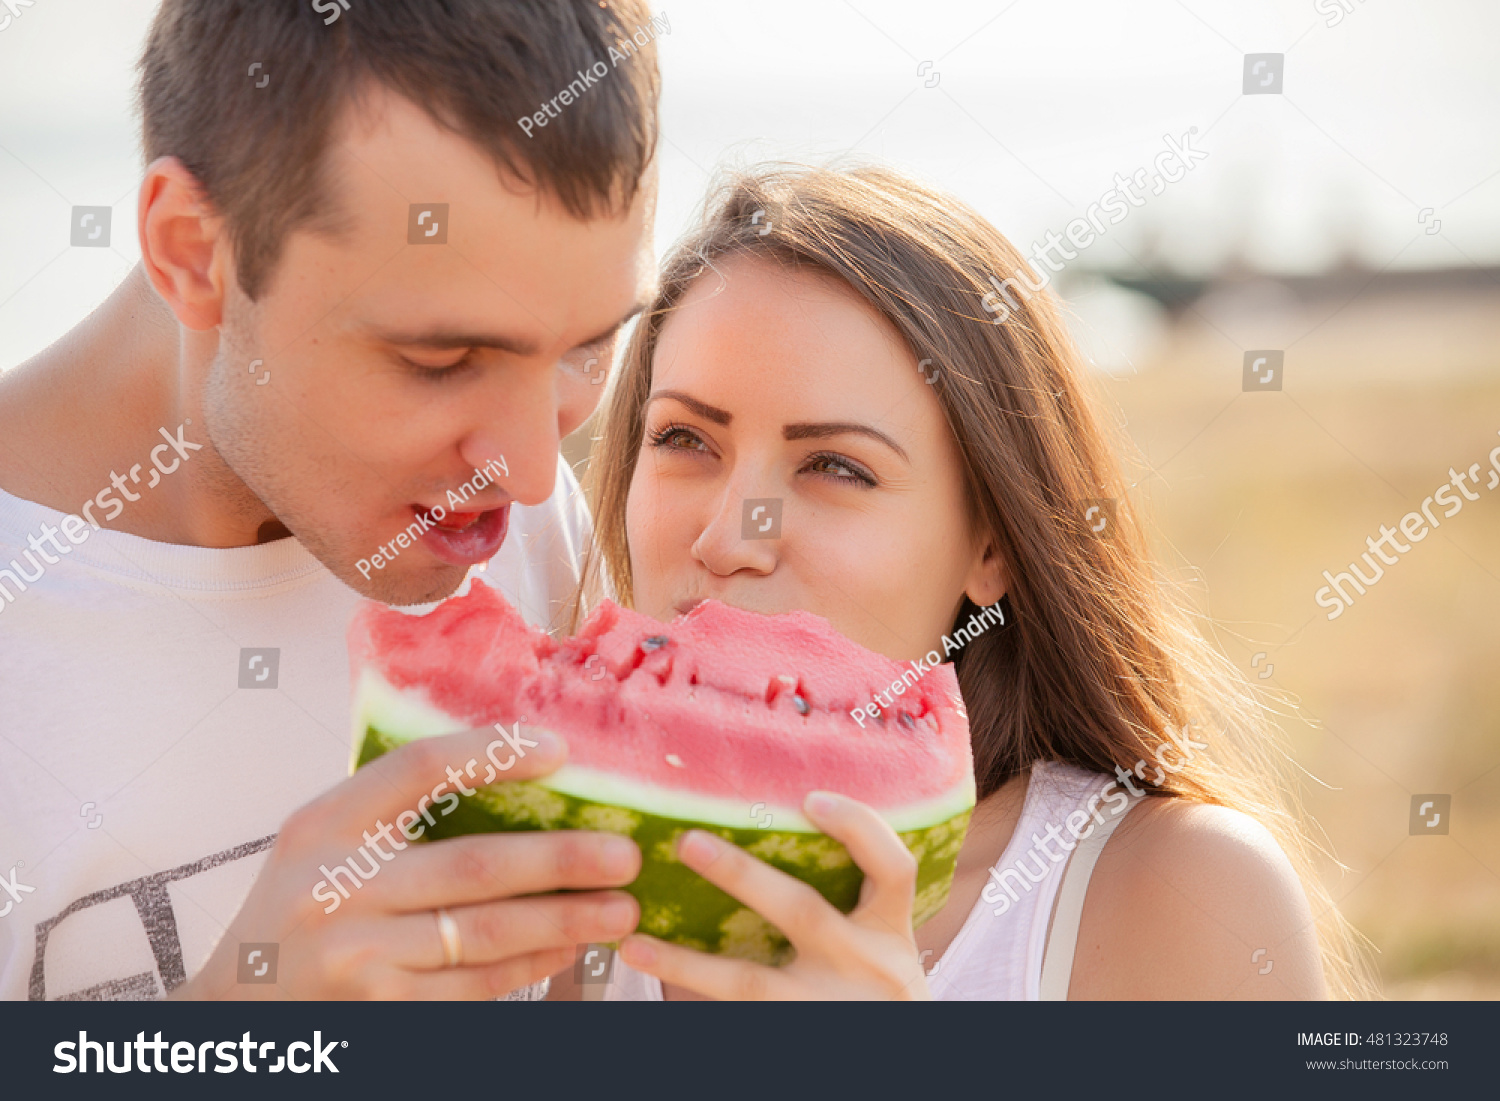 smiling young couple eating fresh melon together #481323748